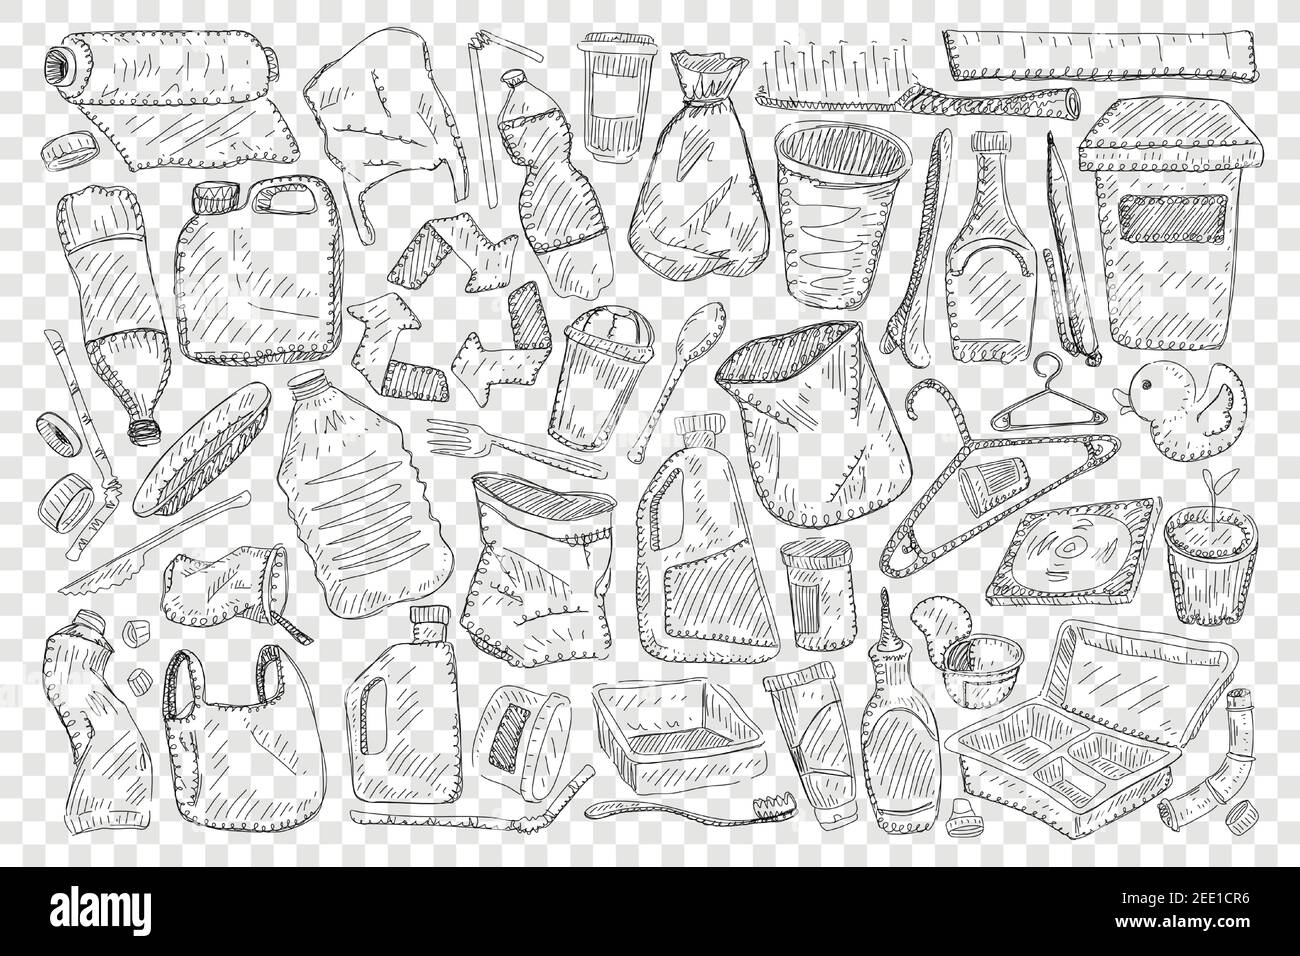 Free art print of Garbage cans sketch. Doodle style trash can sketch in  vector format. Set includes garbage cans in a variety of states | FreeArt |  fa10381849